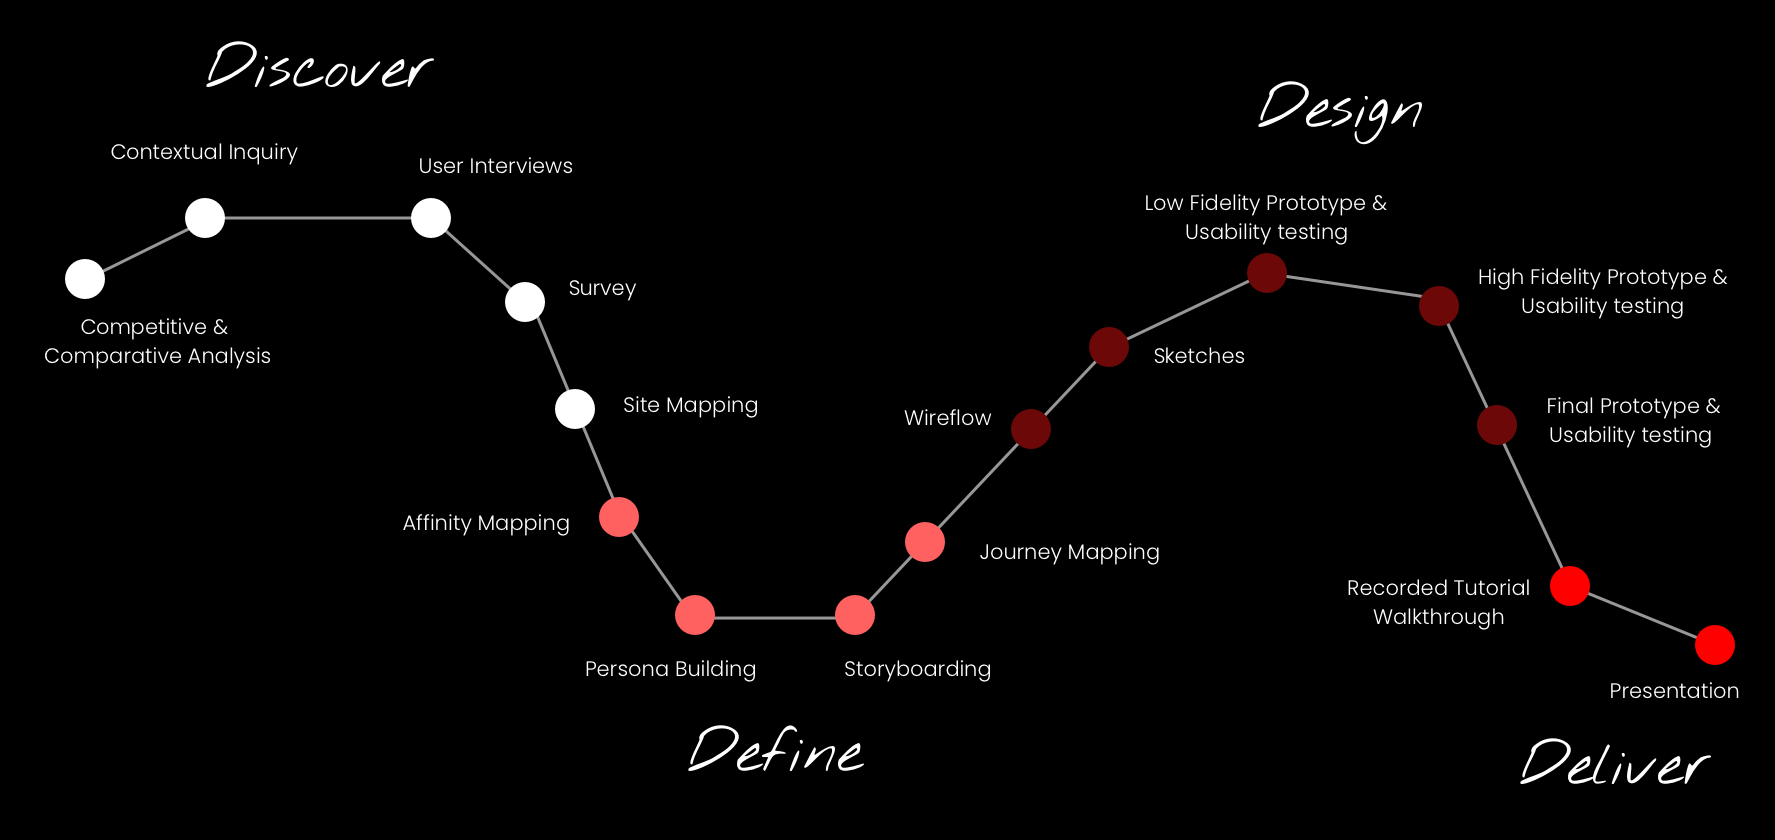 Process-Path showing all of the steps taken from discovering, defining, designing, and delivering the project